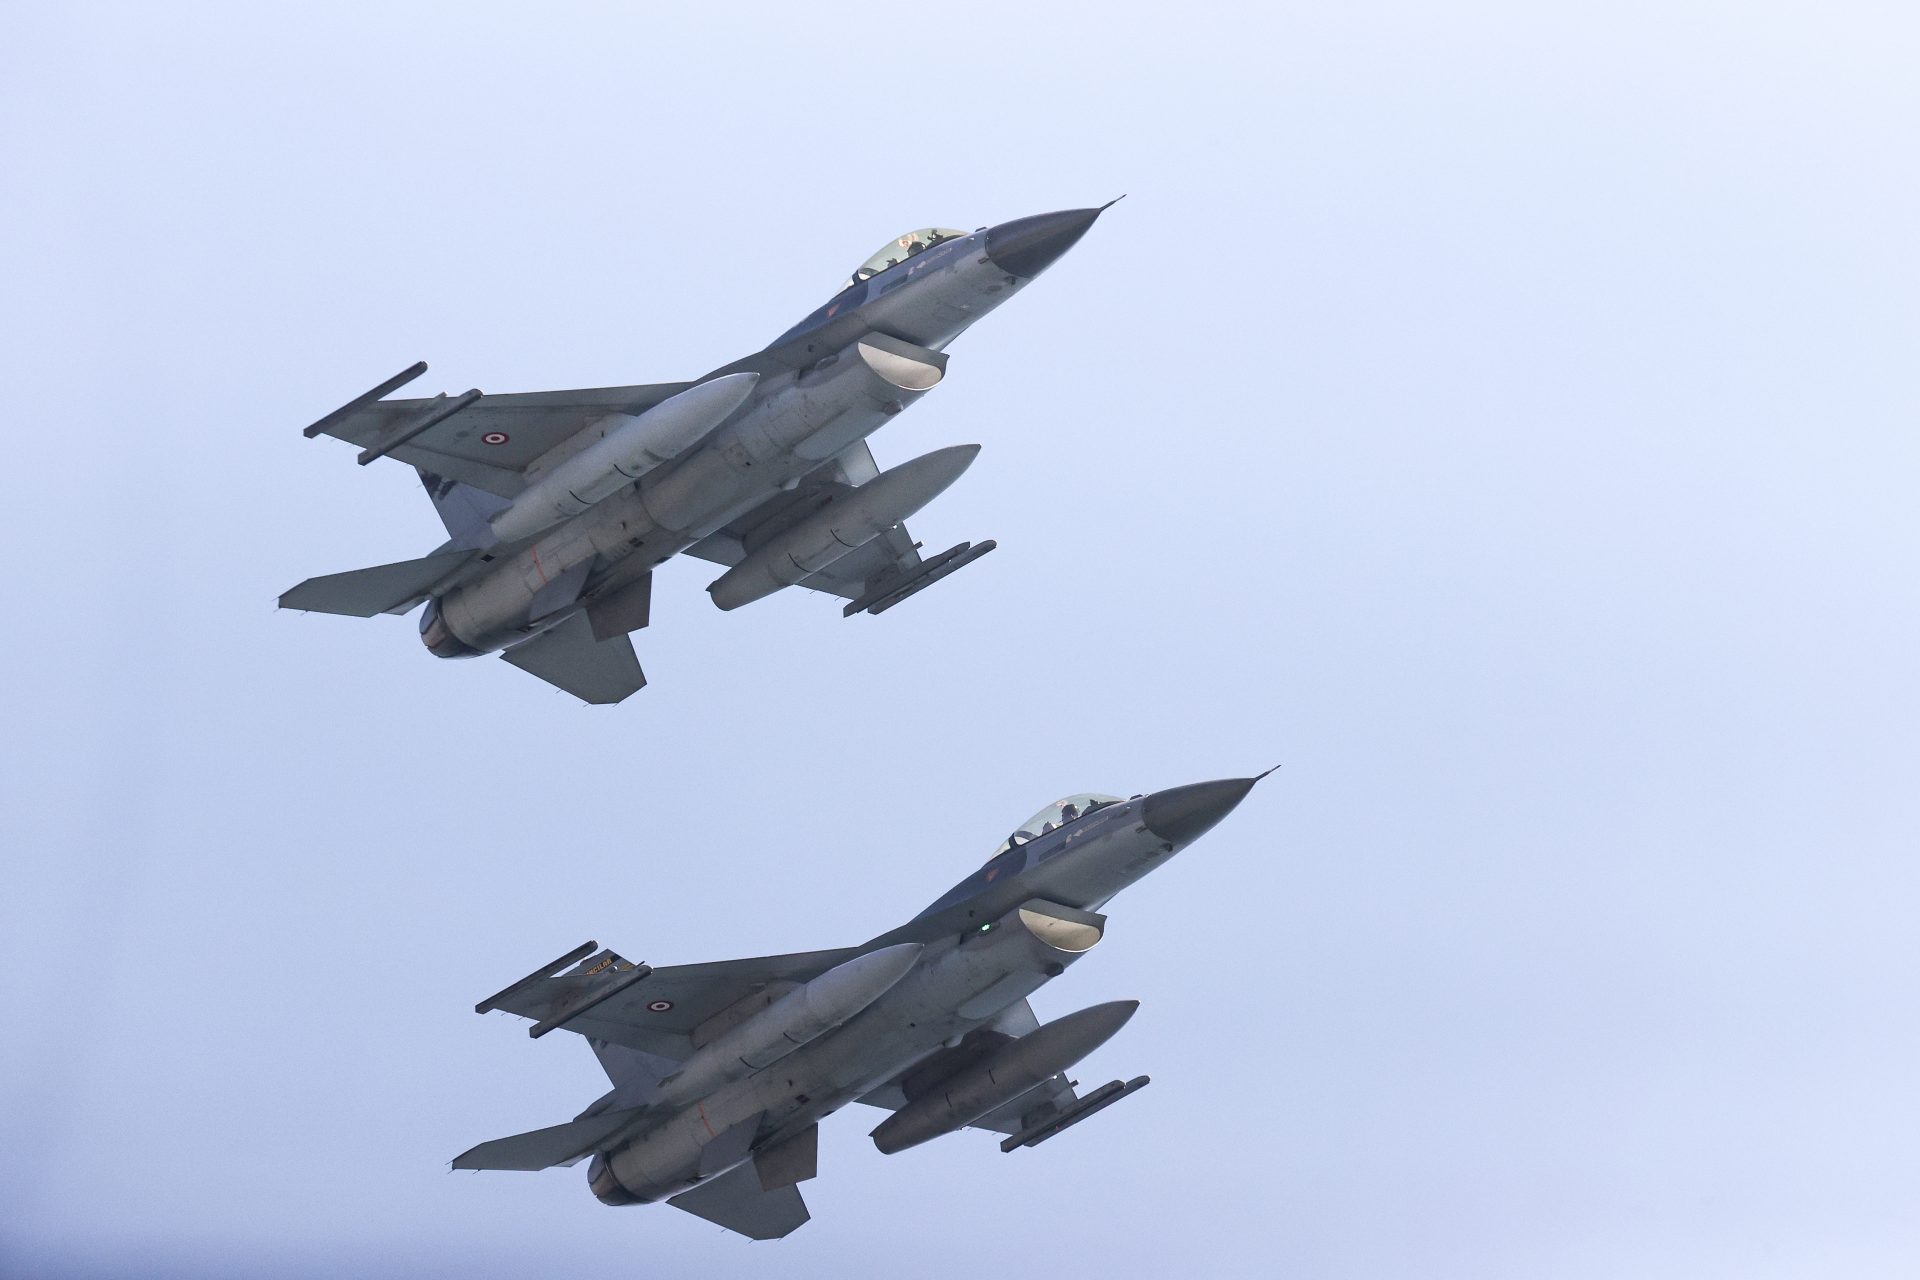 A Ukrainian ally is sending Kyiv F-16s for deep strikes into Russia's rear